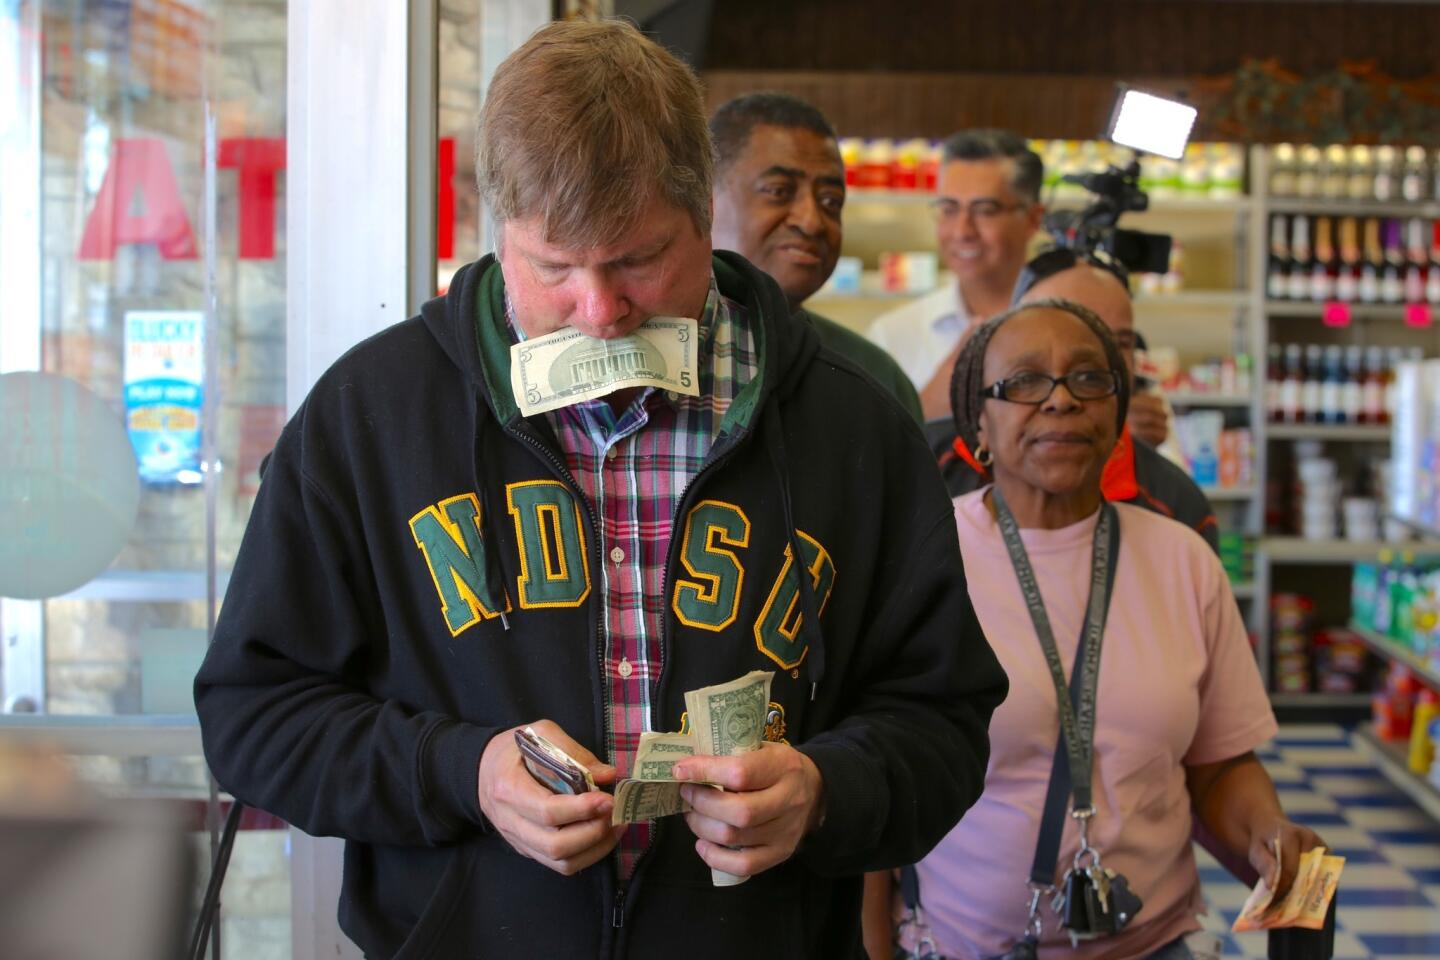 Mark Boesen stands in line to puchase Powerball lottery tickets at Bluebird Liquor store in Hawthorne on Feb. 11.